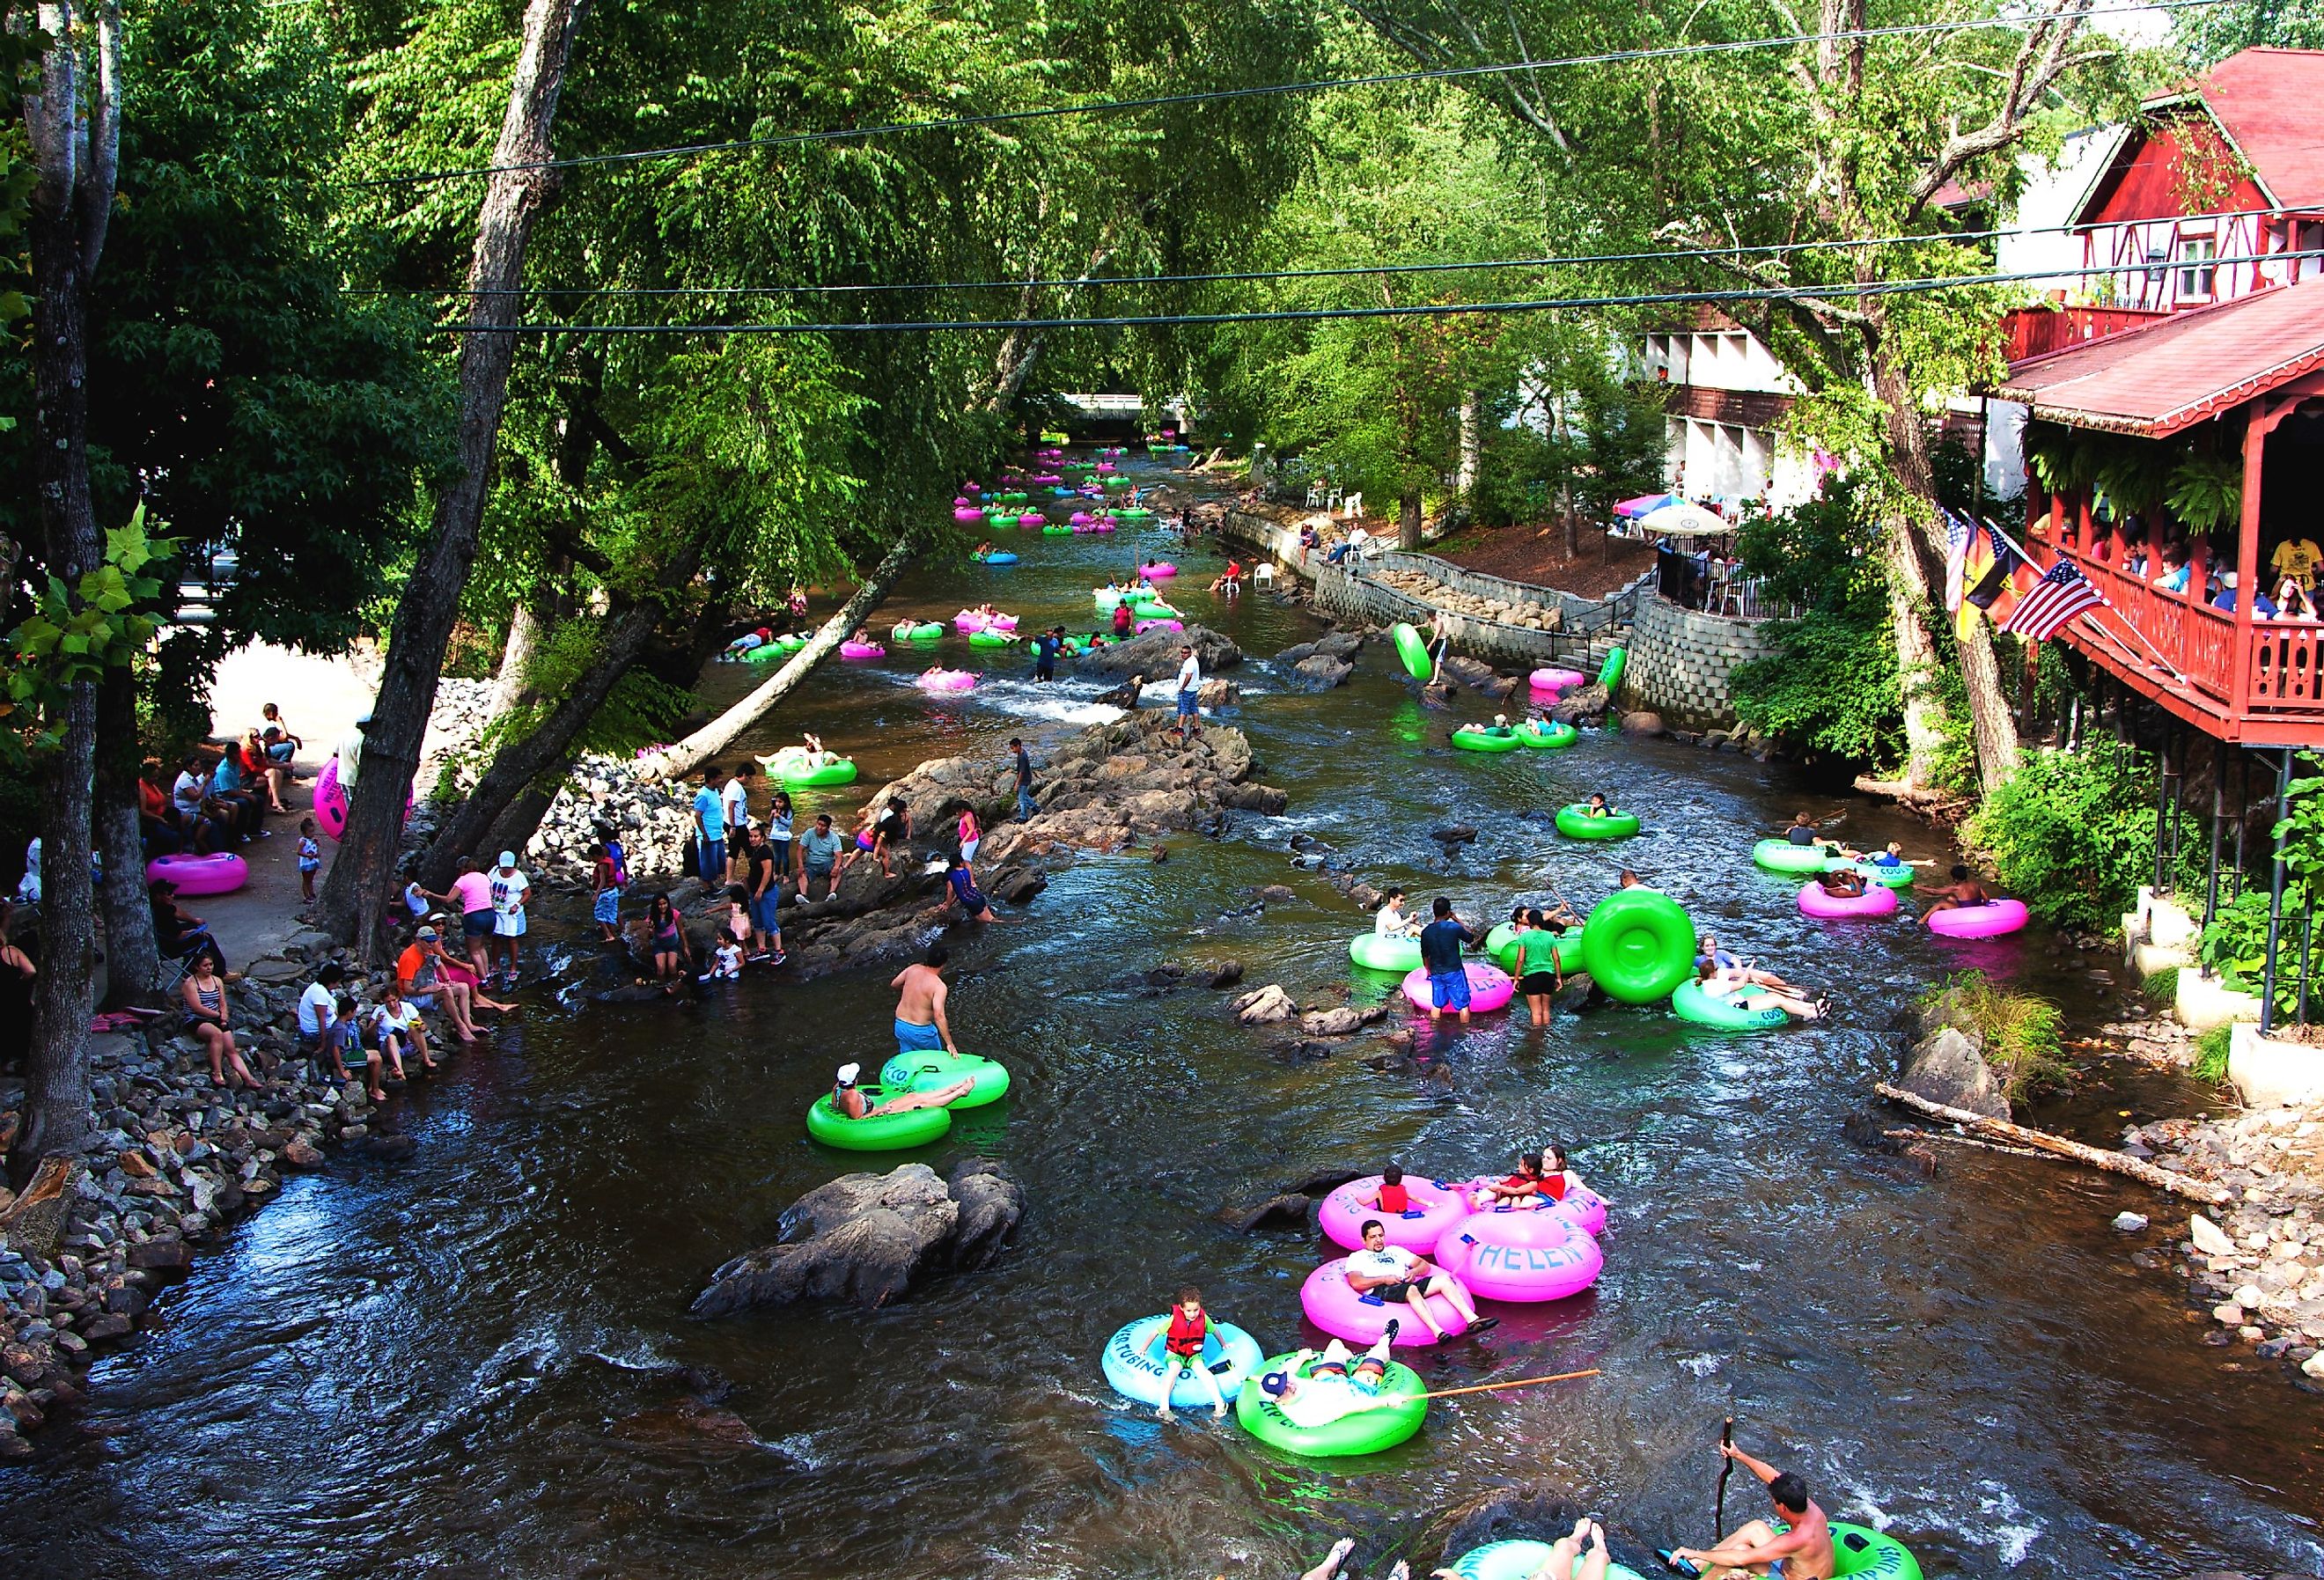 Tourists tubing the lazy river Chattahoochee in the summer in Helen, Georgia. Image credit Paul Hakimata Photography via Shutterstock